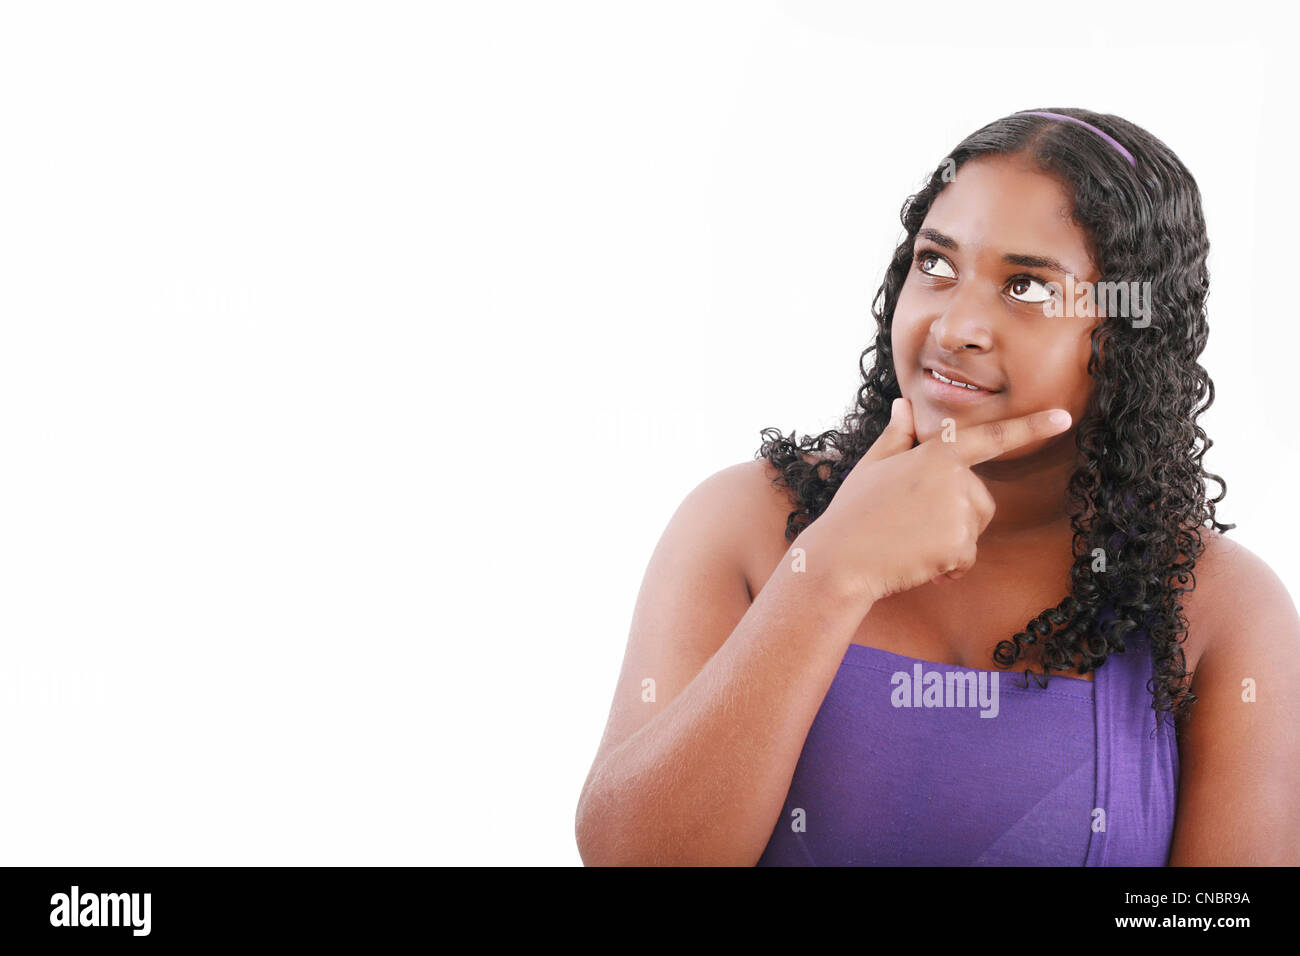 Portrait of teenage girl smiling and looking away Stock Photo